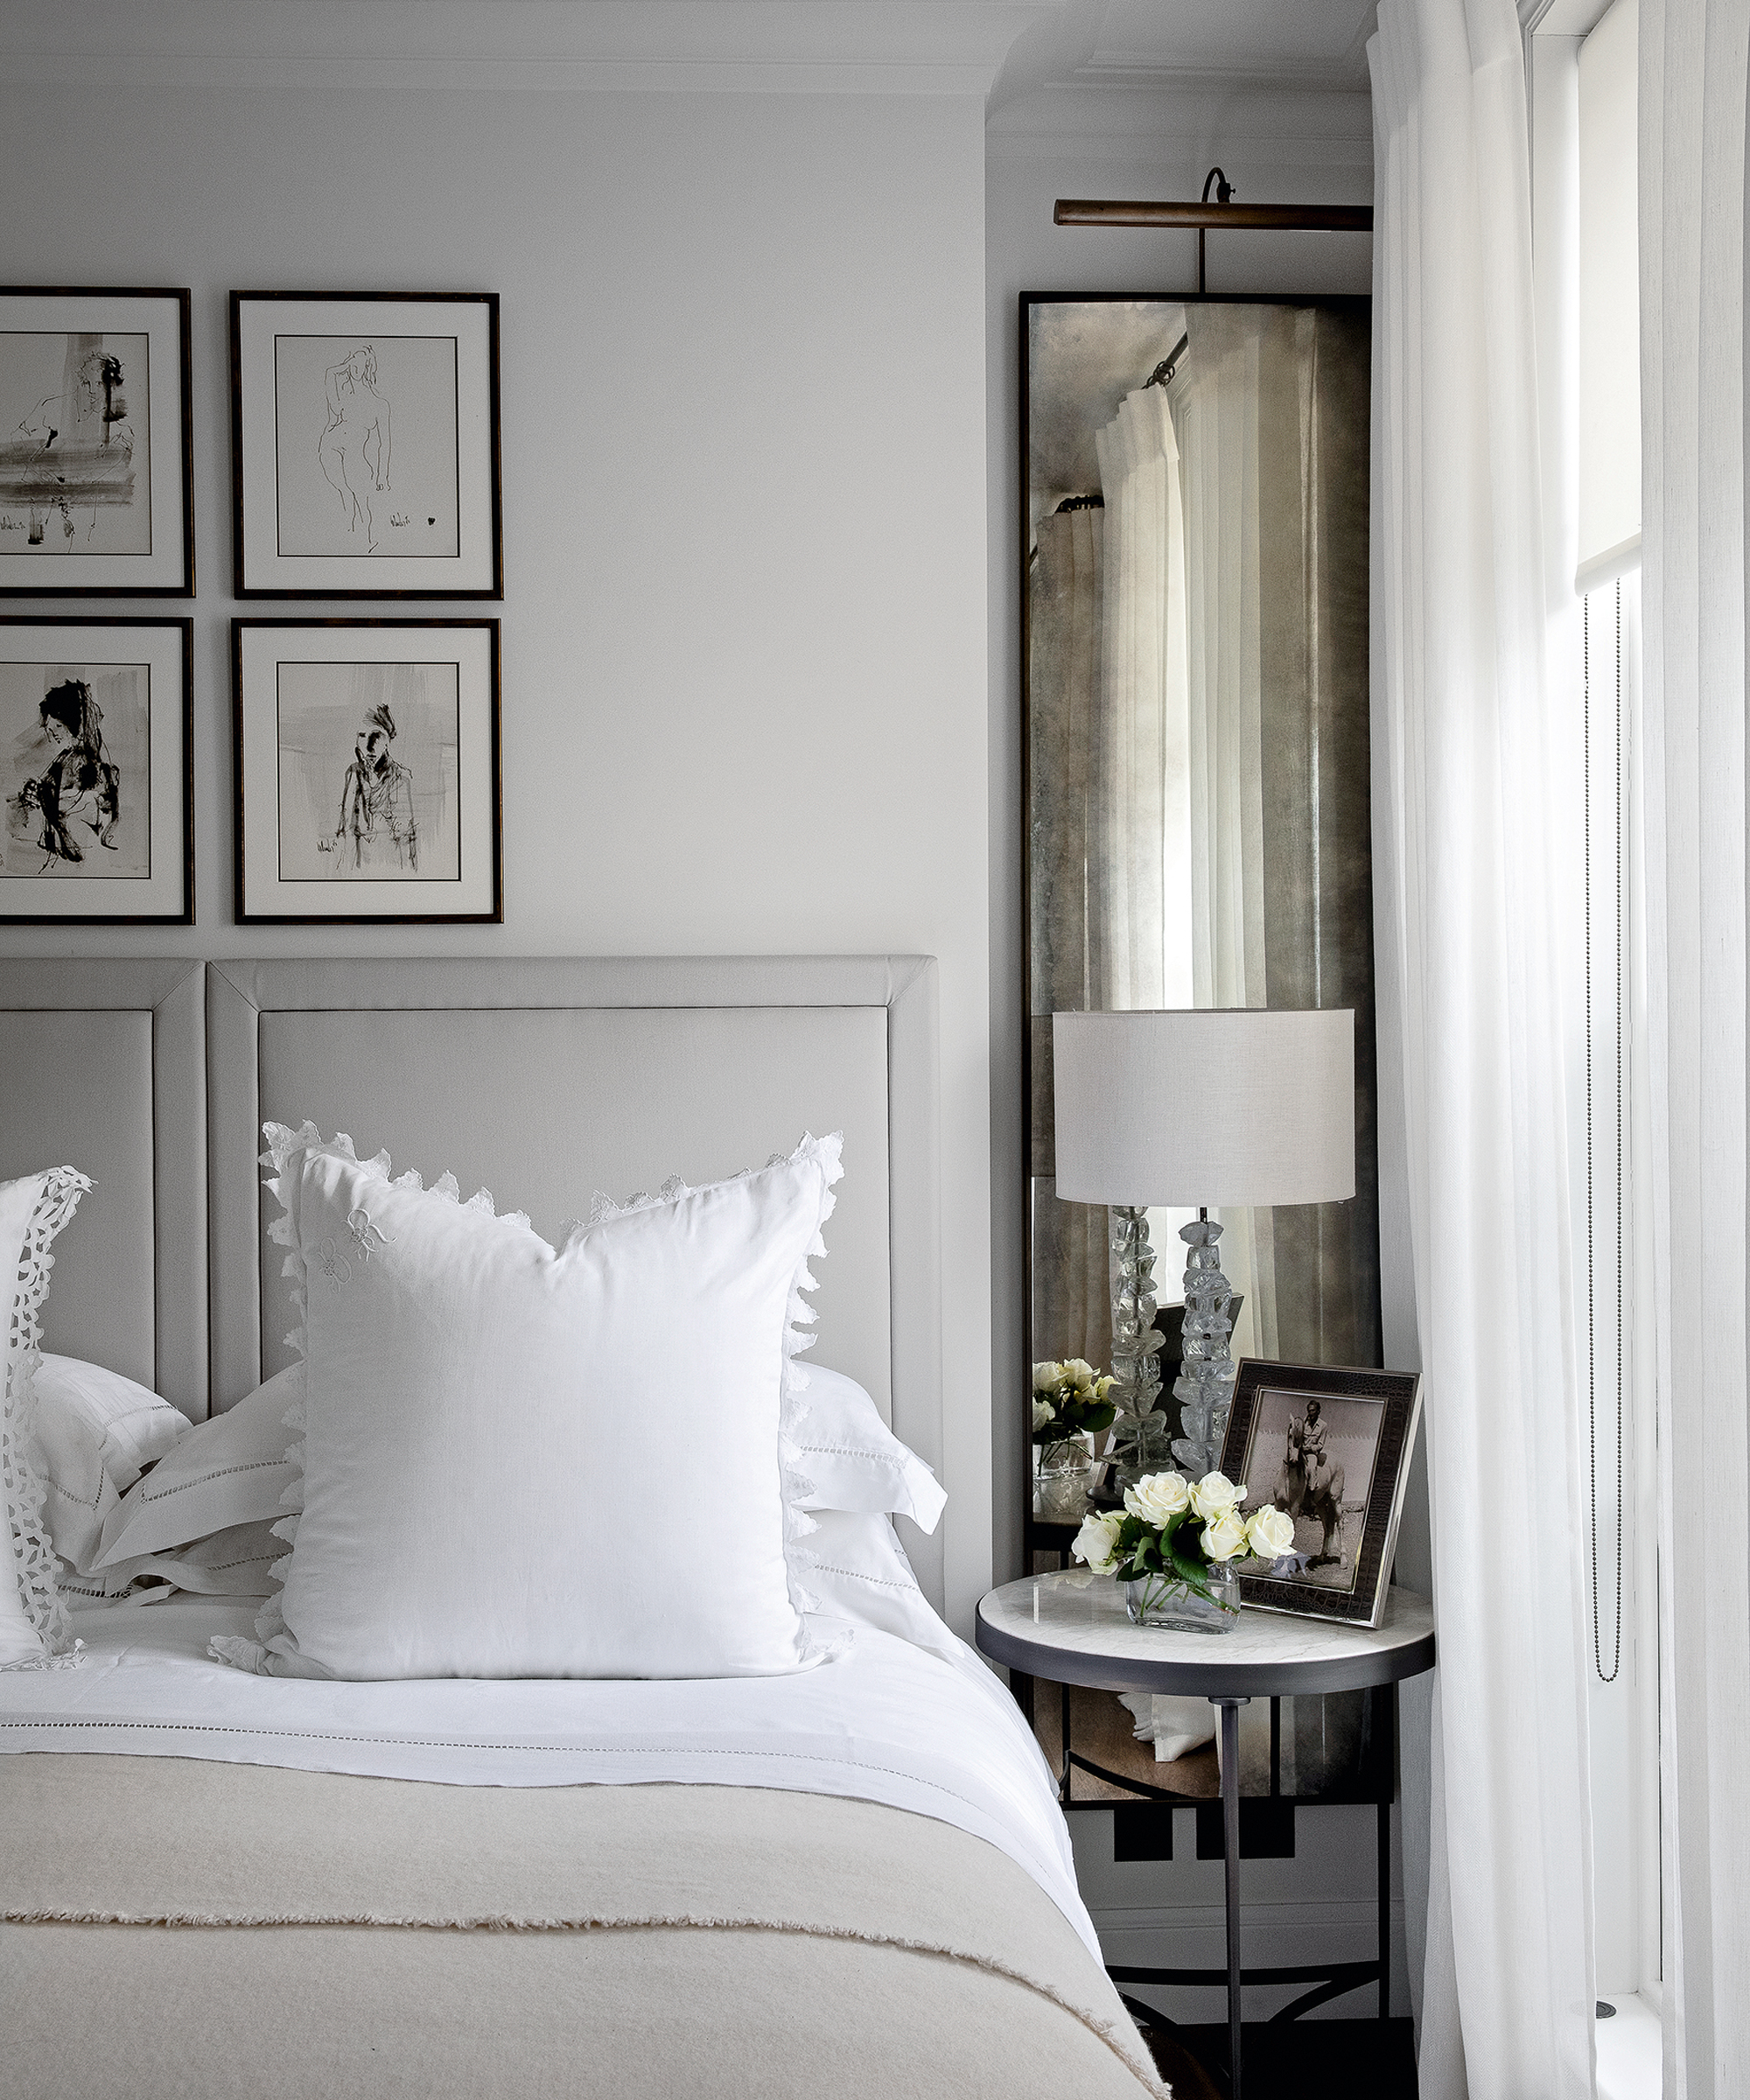 A grey bedroom idea with pale grey headboard, tarnished mirror and white linen